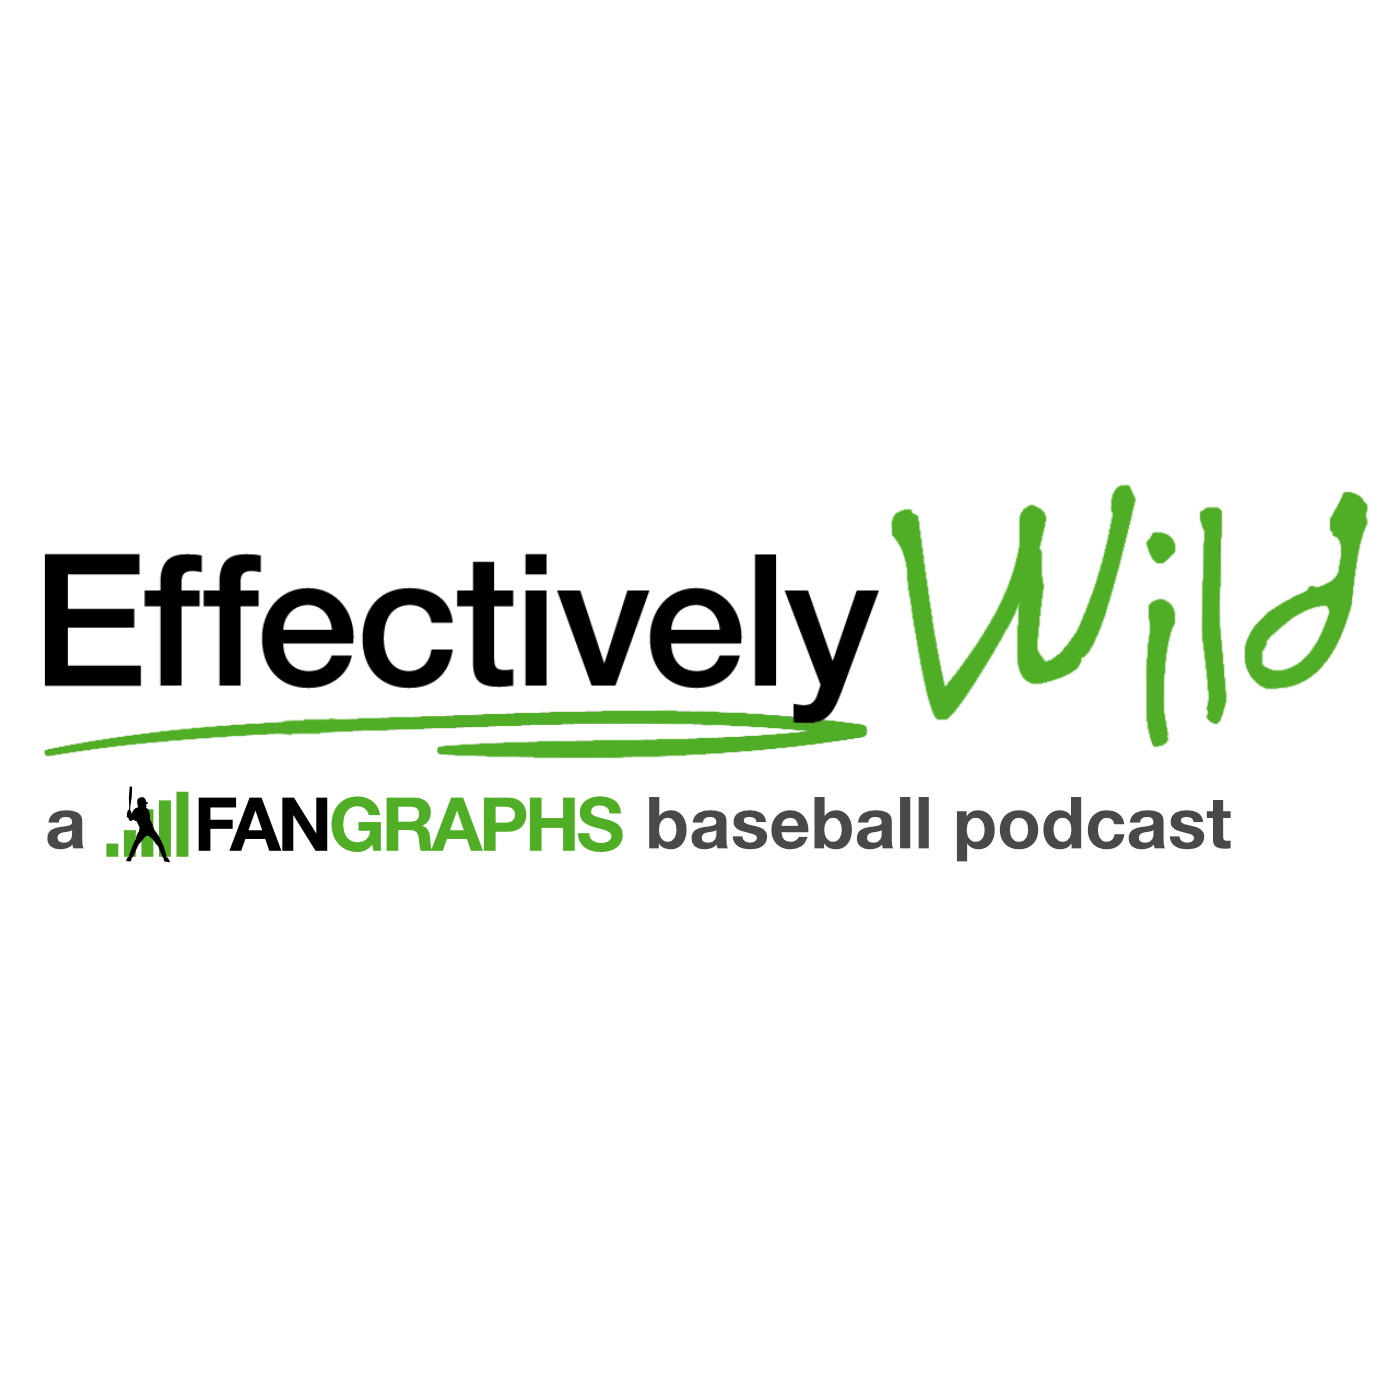 A highlight from Effectively Wild Episode 1873: Puke and Rally Cap